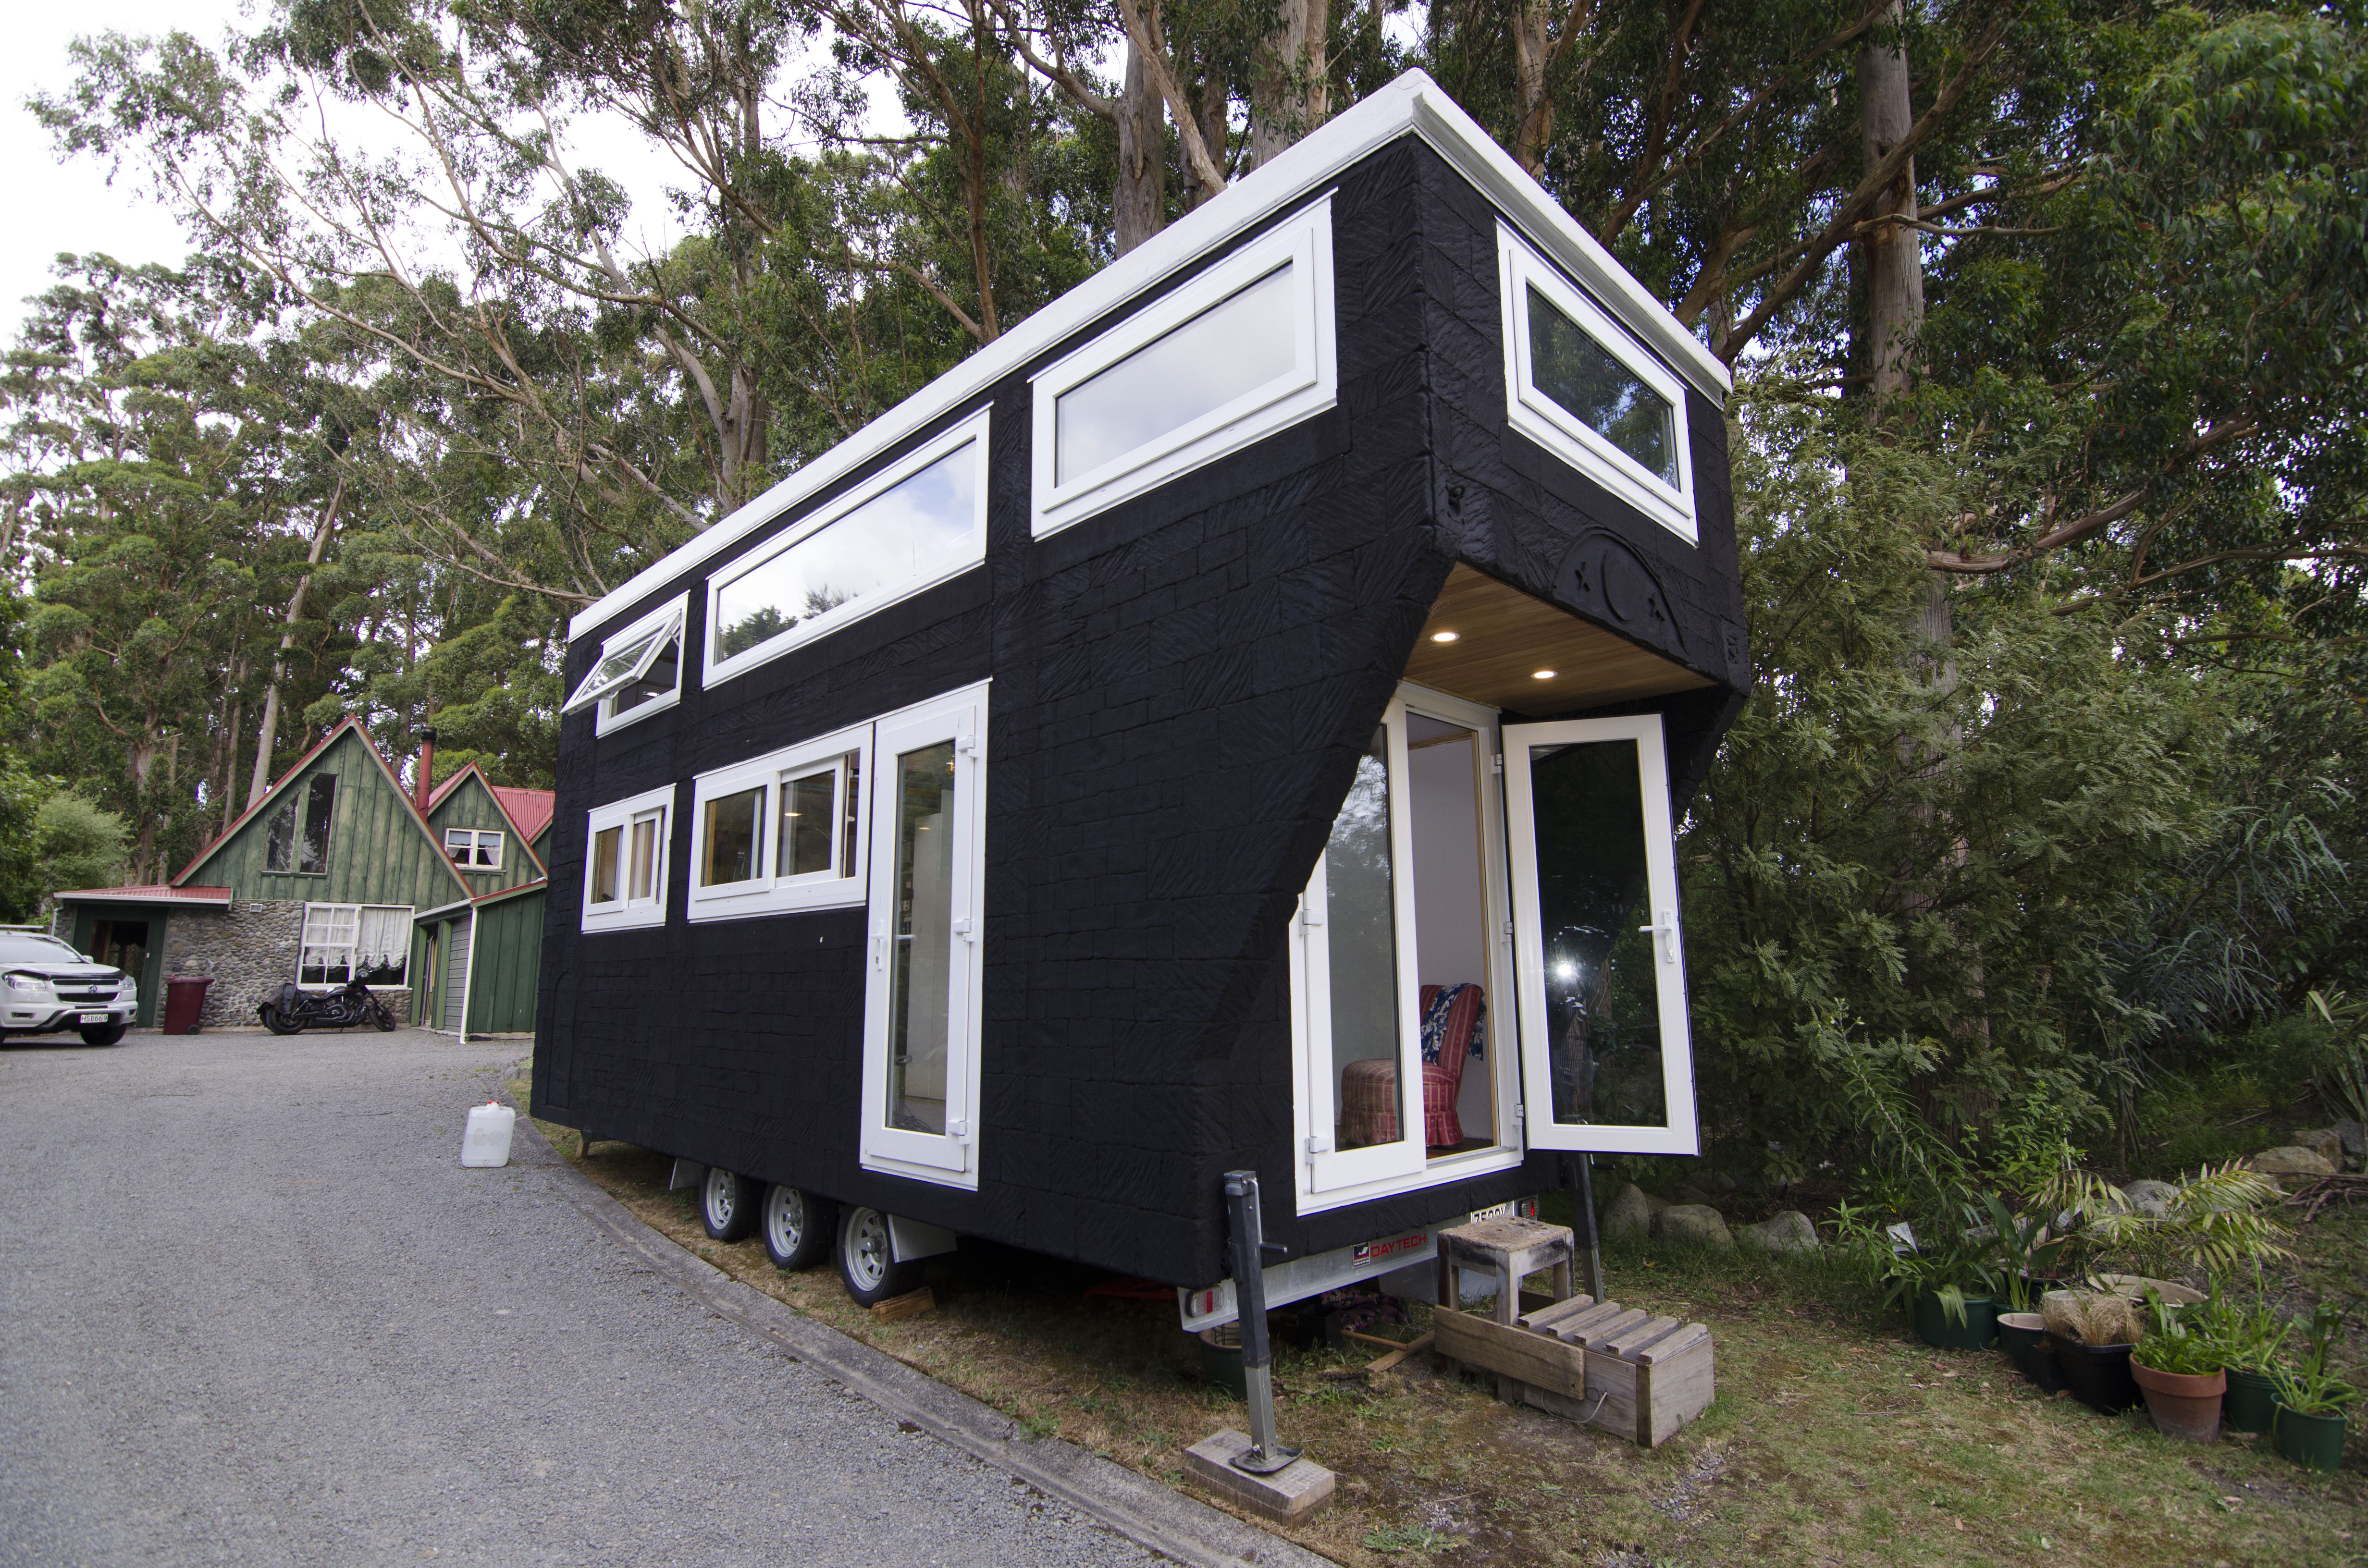 Couple Build Tiny House For $45K - Nz Herald